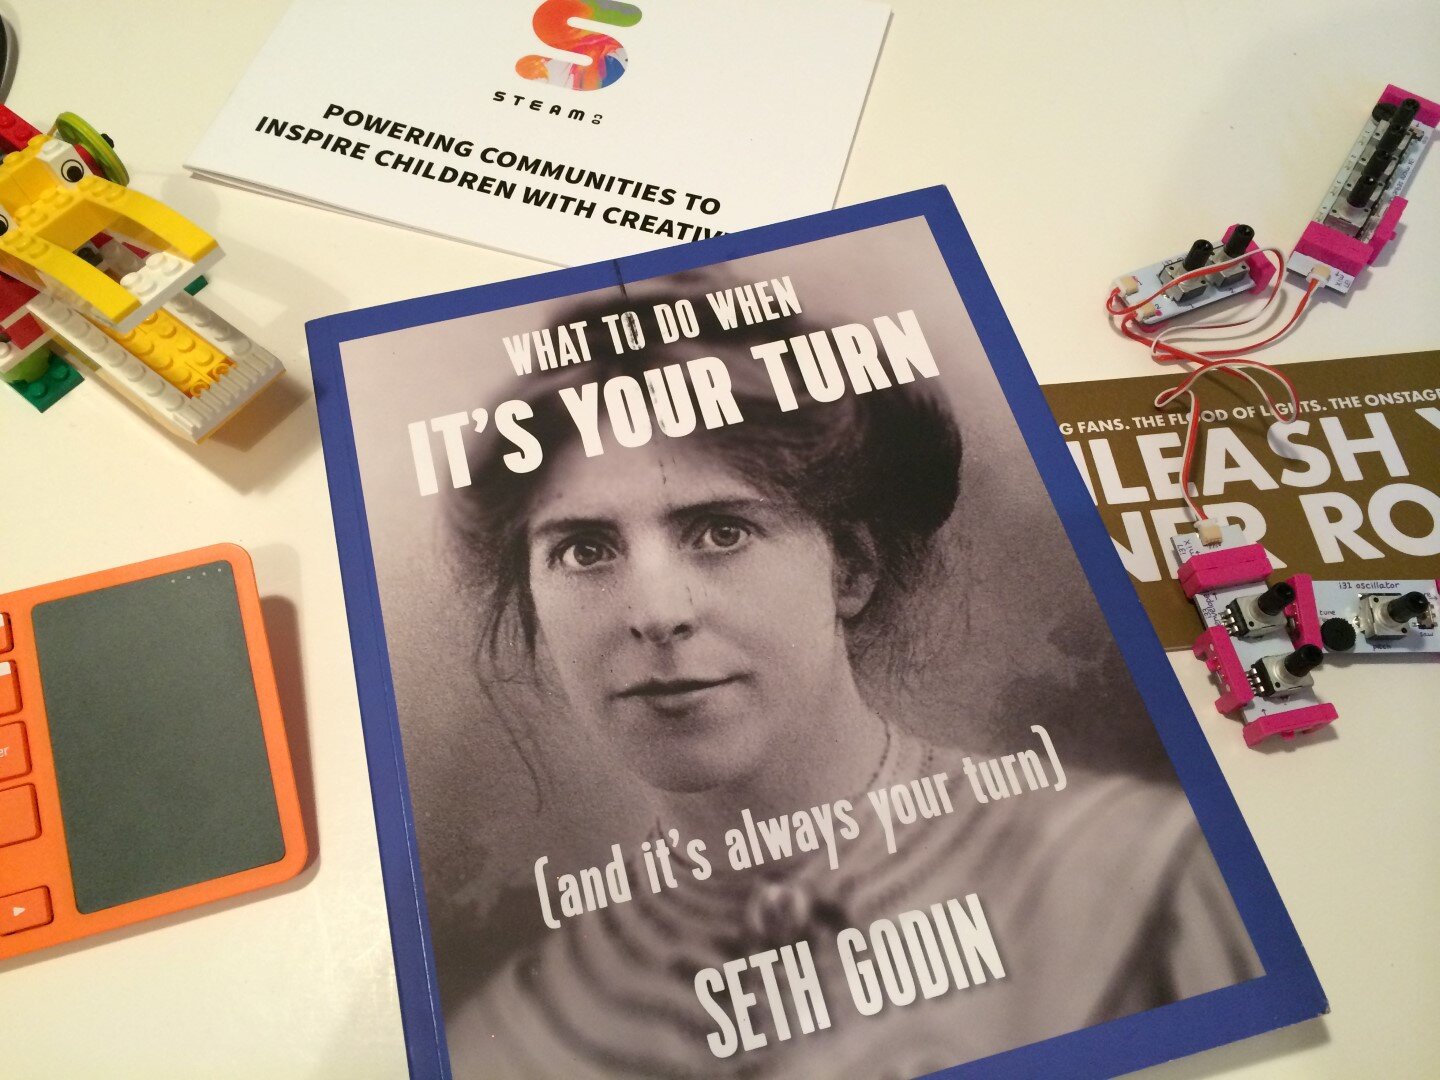 Seth Godin Its your turn book and STEAM Co (3) (Large).jpg